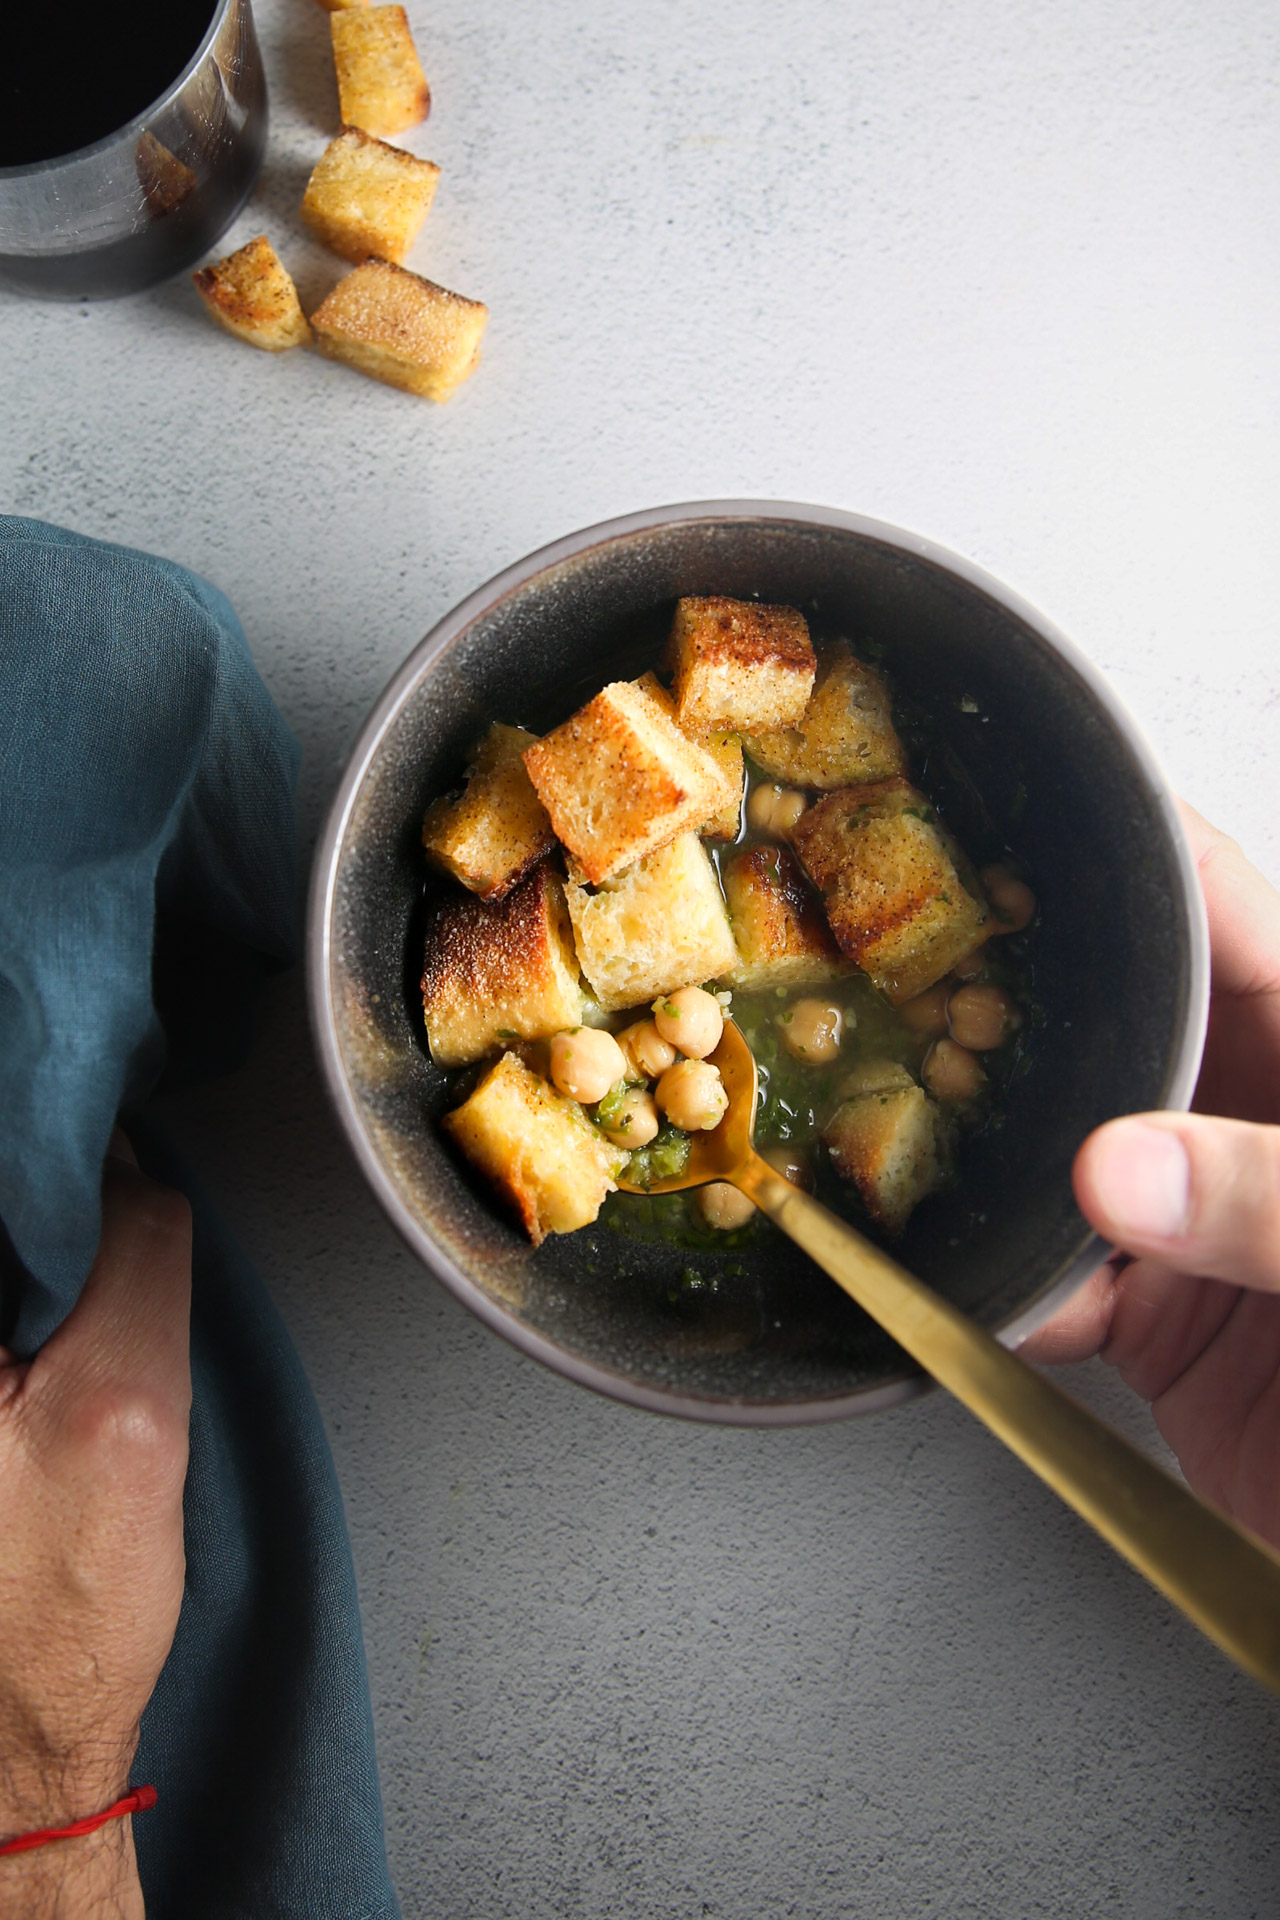 Croutons in a bowl with a person holding a spoon for Portuguese Soup.